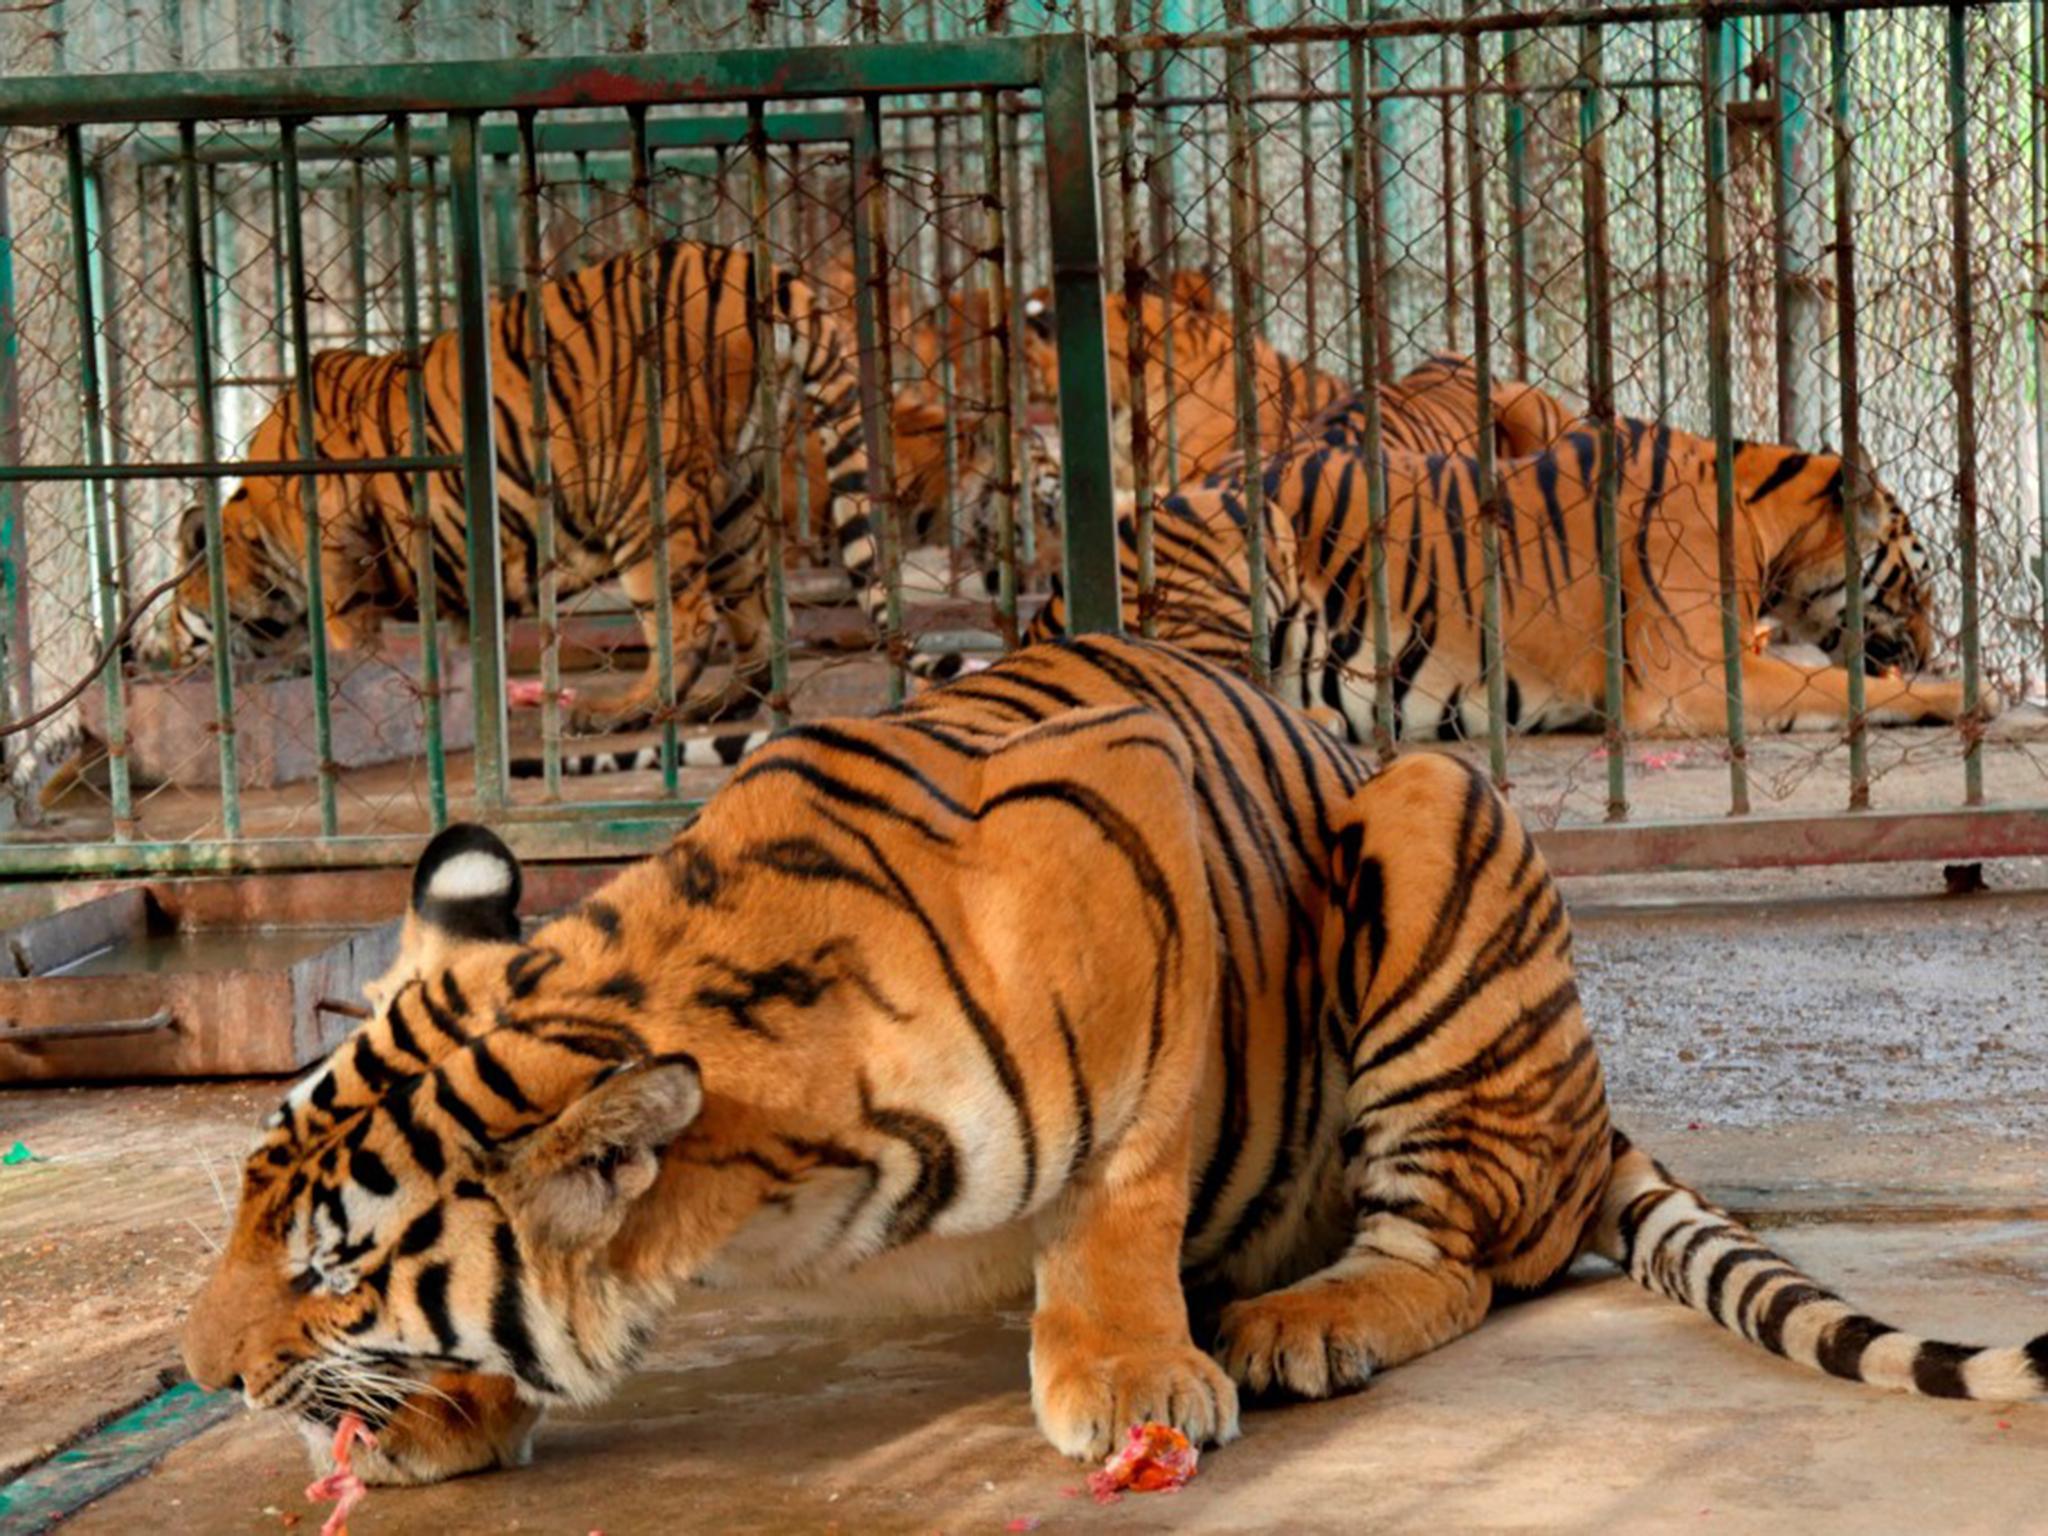 The harrowing truth about tiger farming in southeast Asia | The Independent  | The Independent